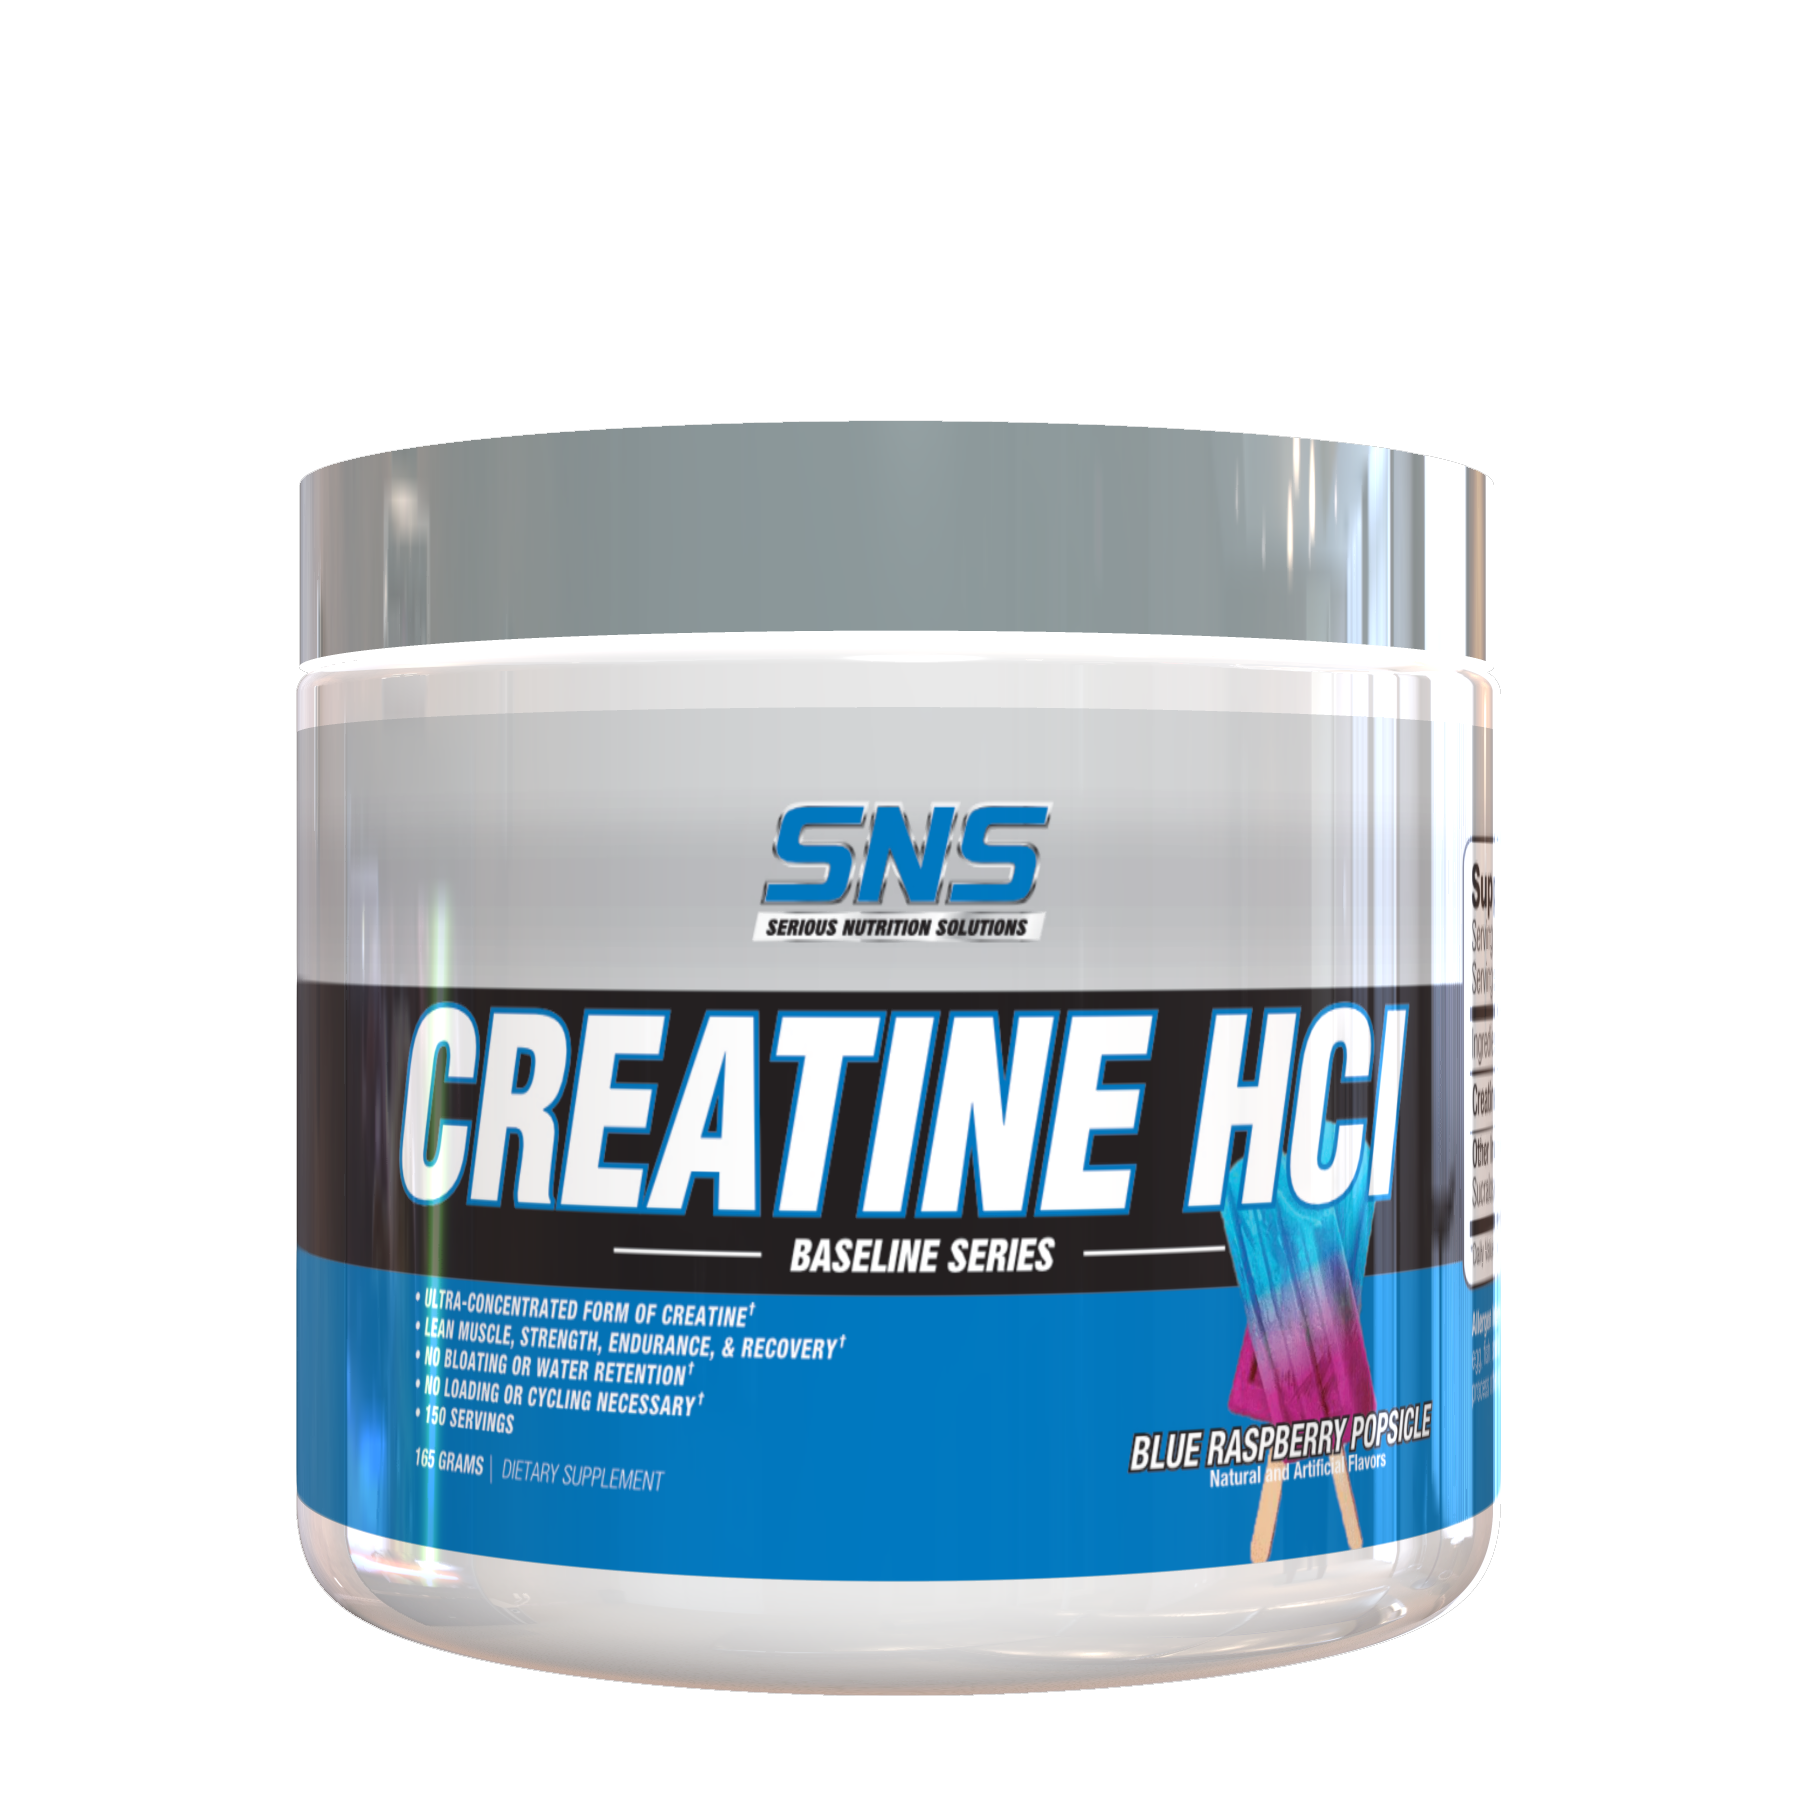 SNS Creatine HCI Blue Raspberry Popsicle A1 Supplements Store